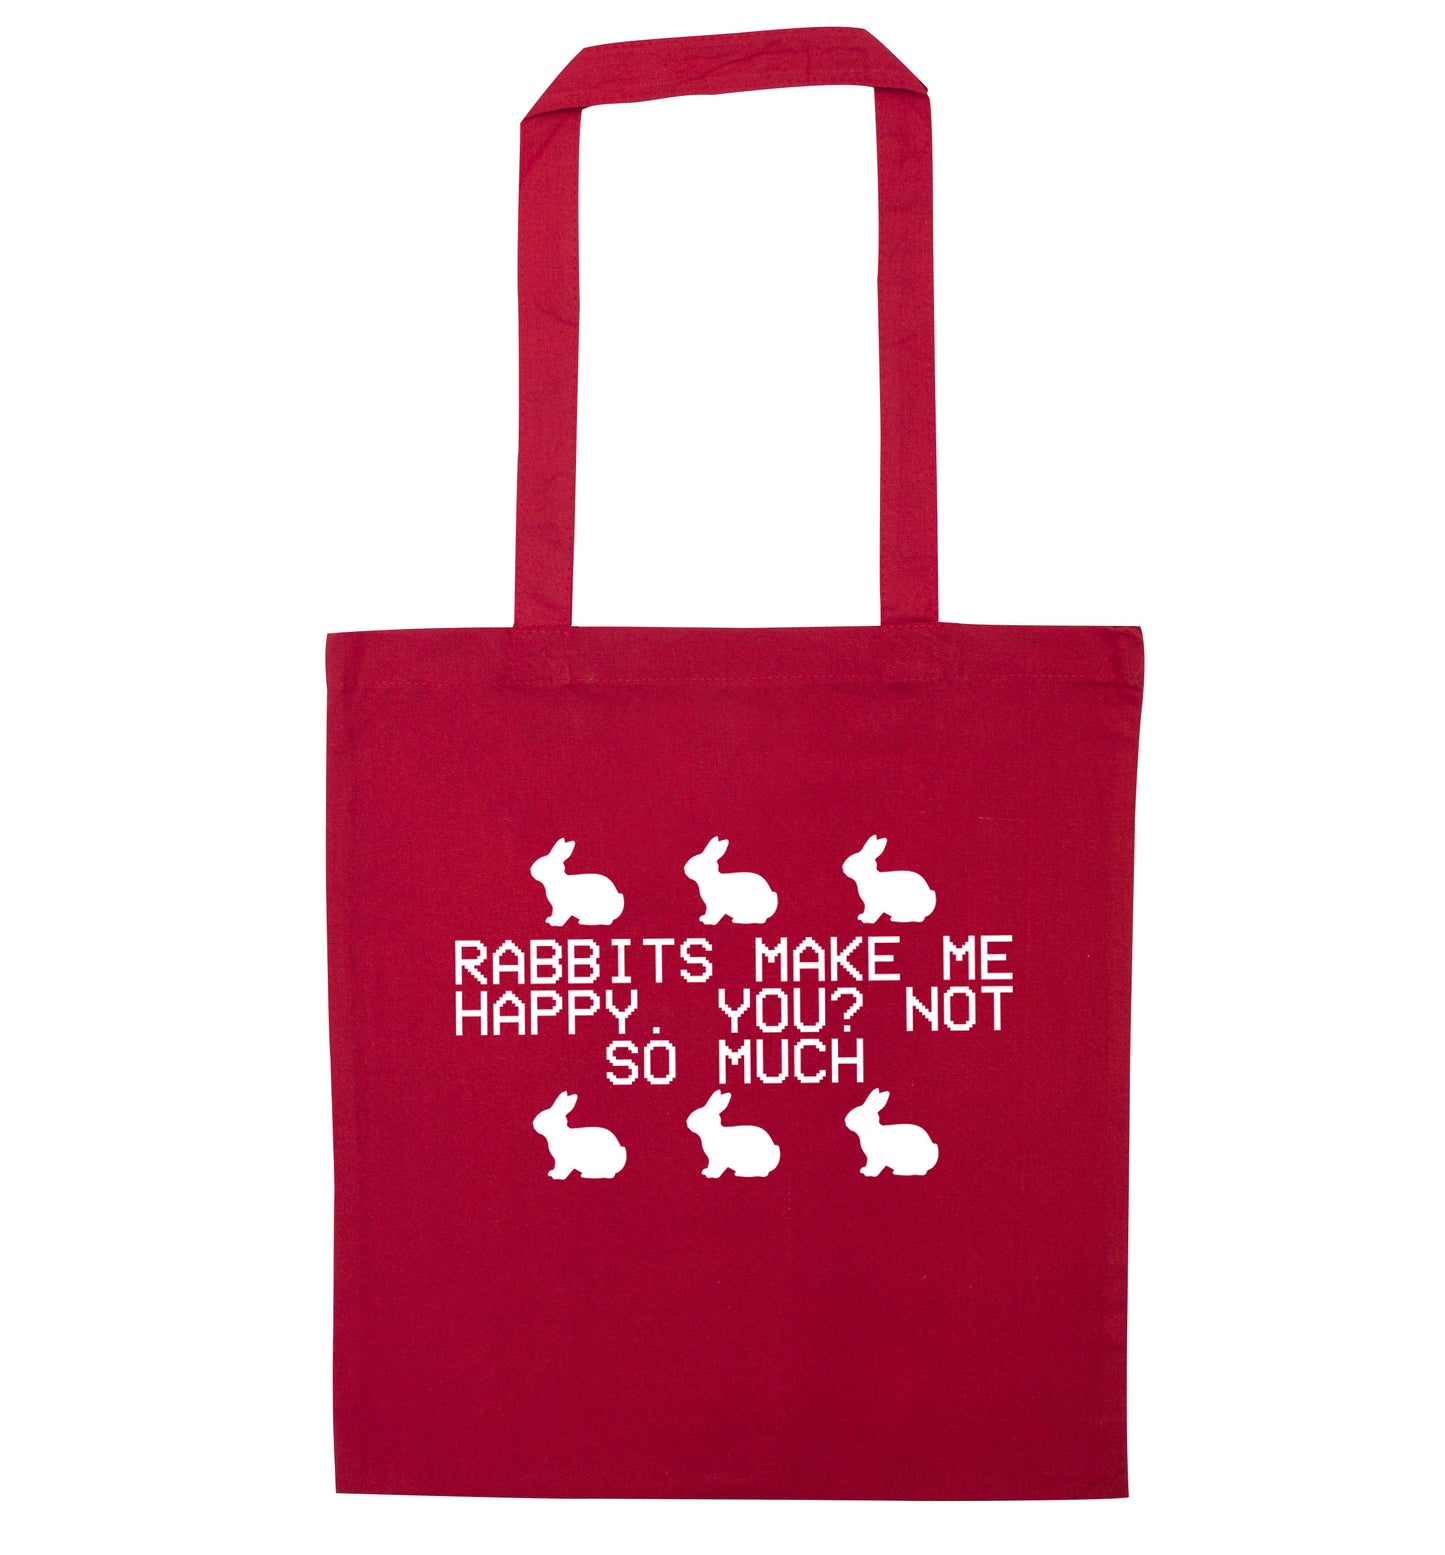 Rabbits make me happy, you not so much red tote bag